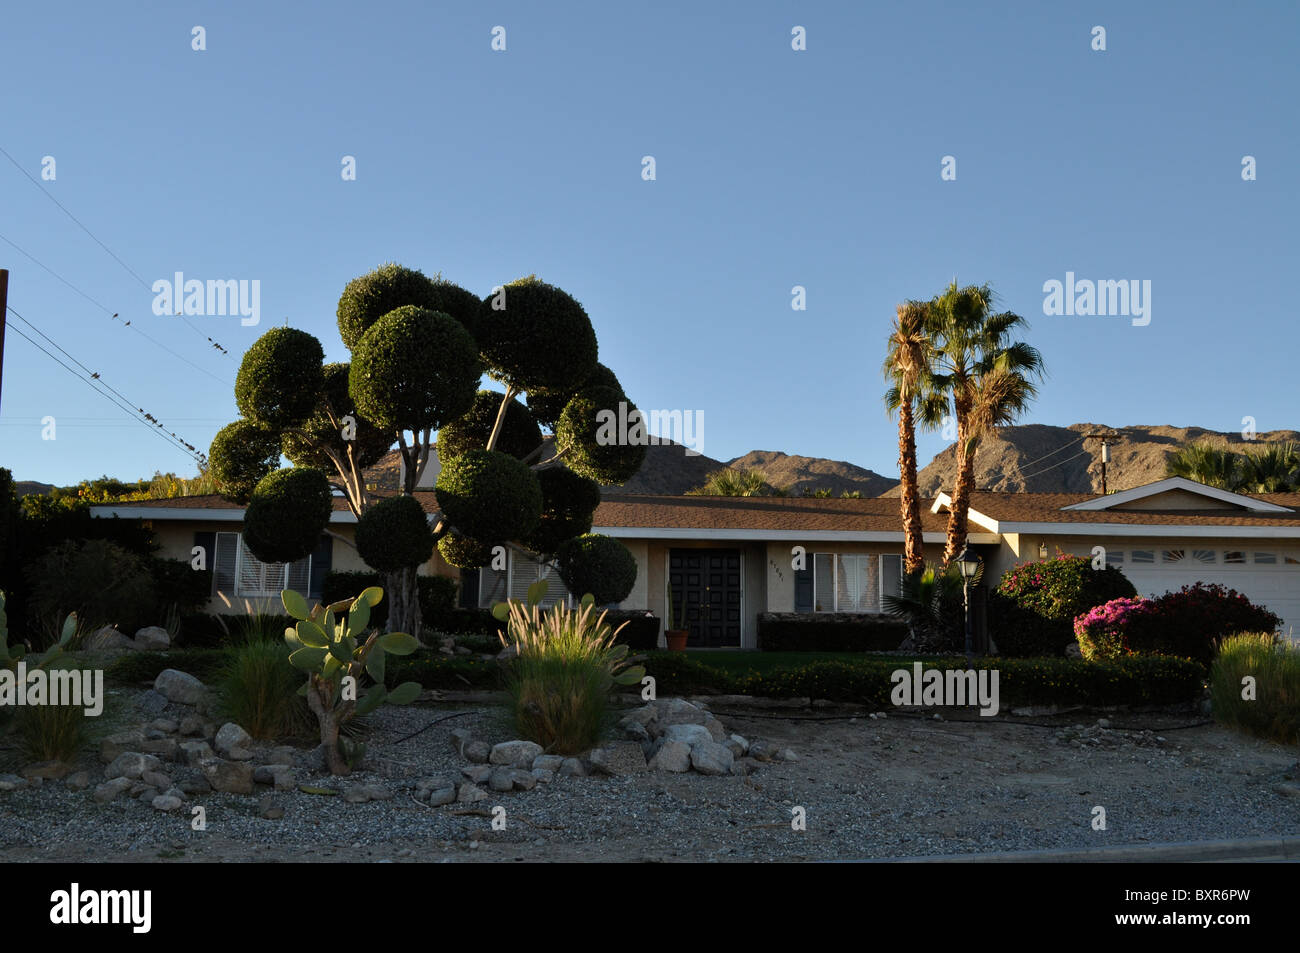 Desert bungalow, Palm Springs, California, early morning light. Architecture and nature blend in desert landscape. Stock Photo